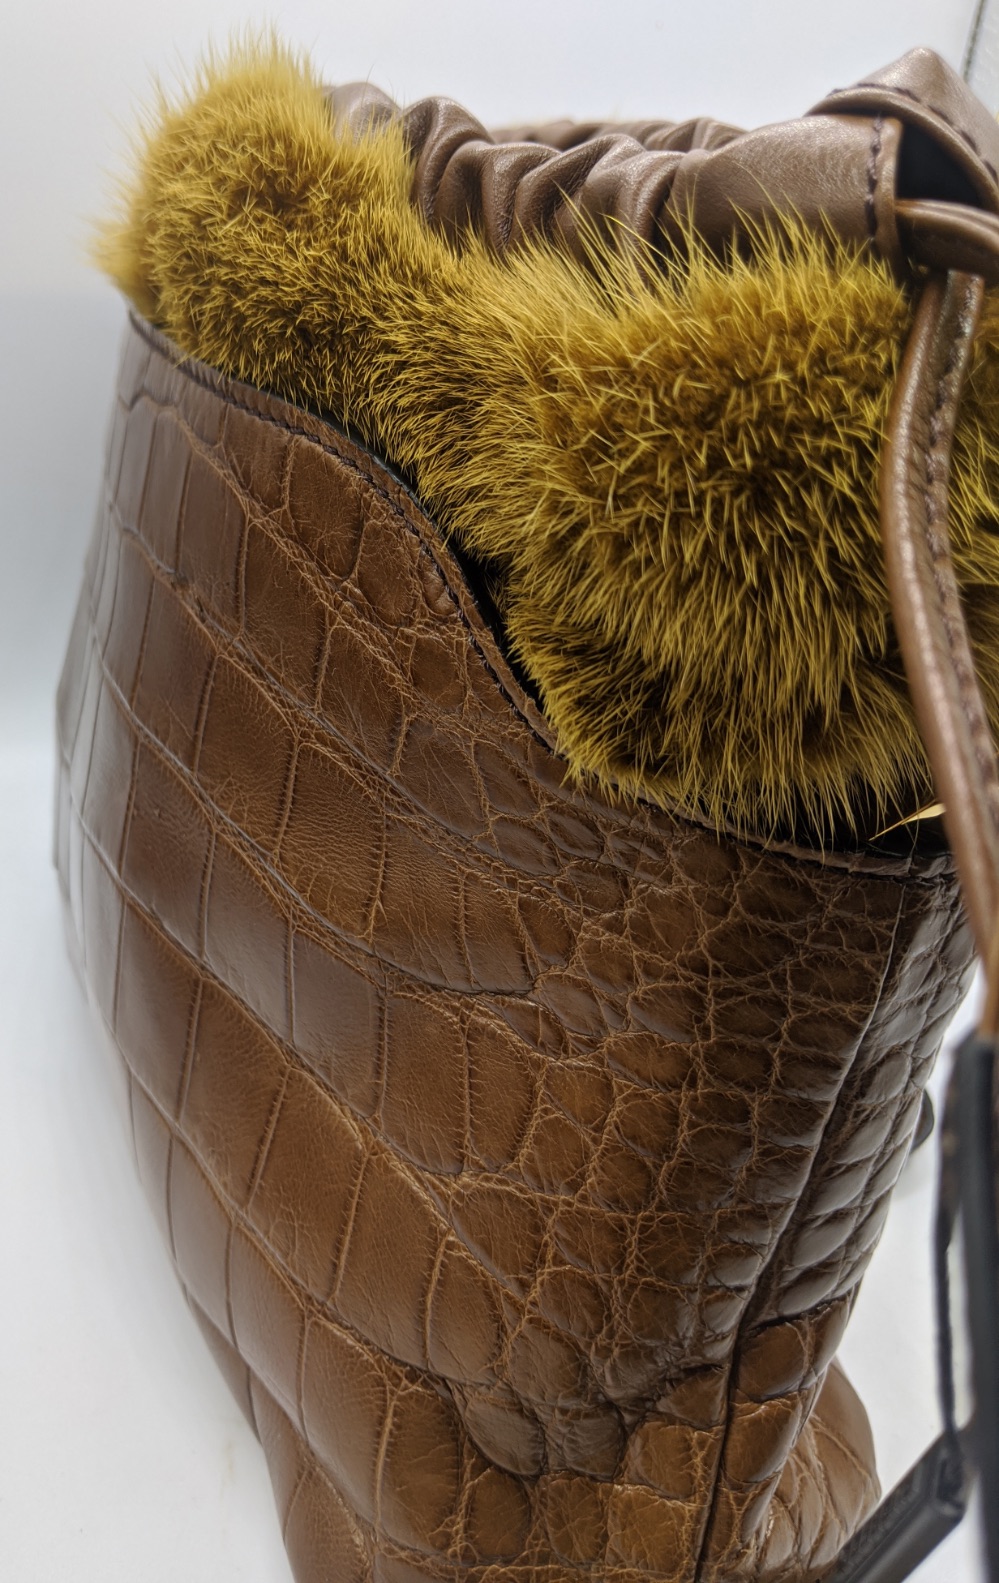 Burberry The Little Crush handag, alligator body with gold mink fur trim and gilt metal hardware, - Image 7 of 12